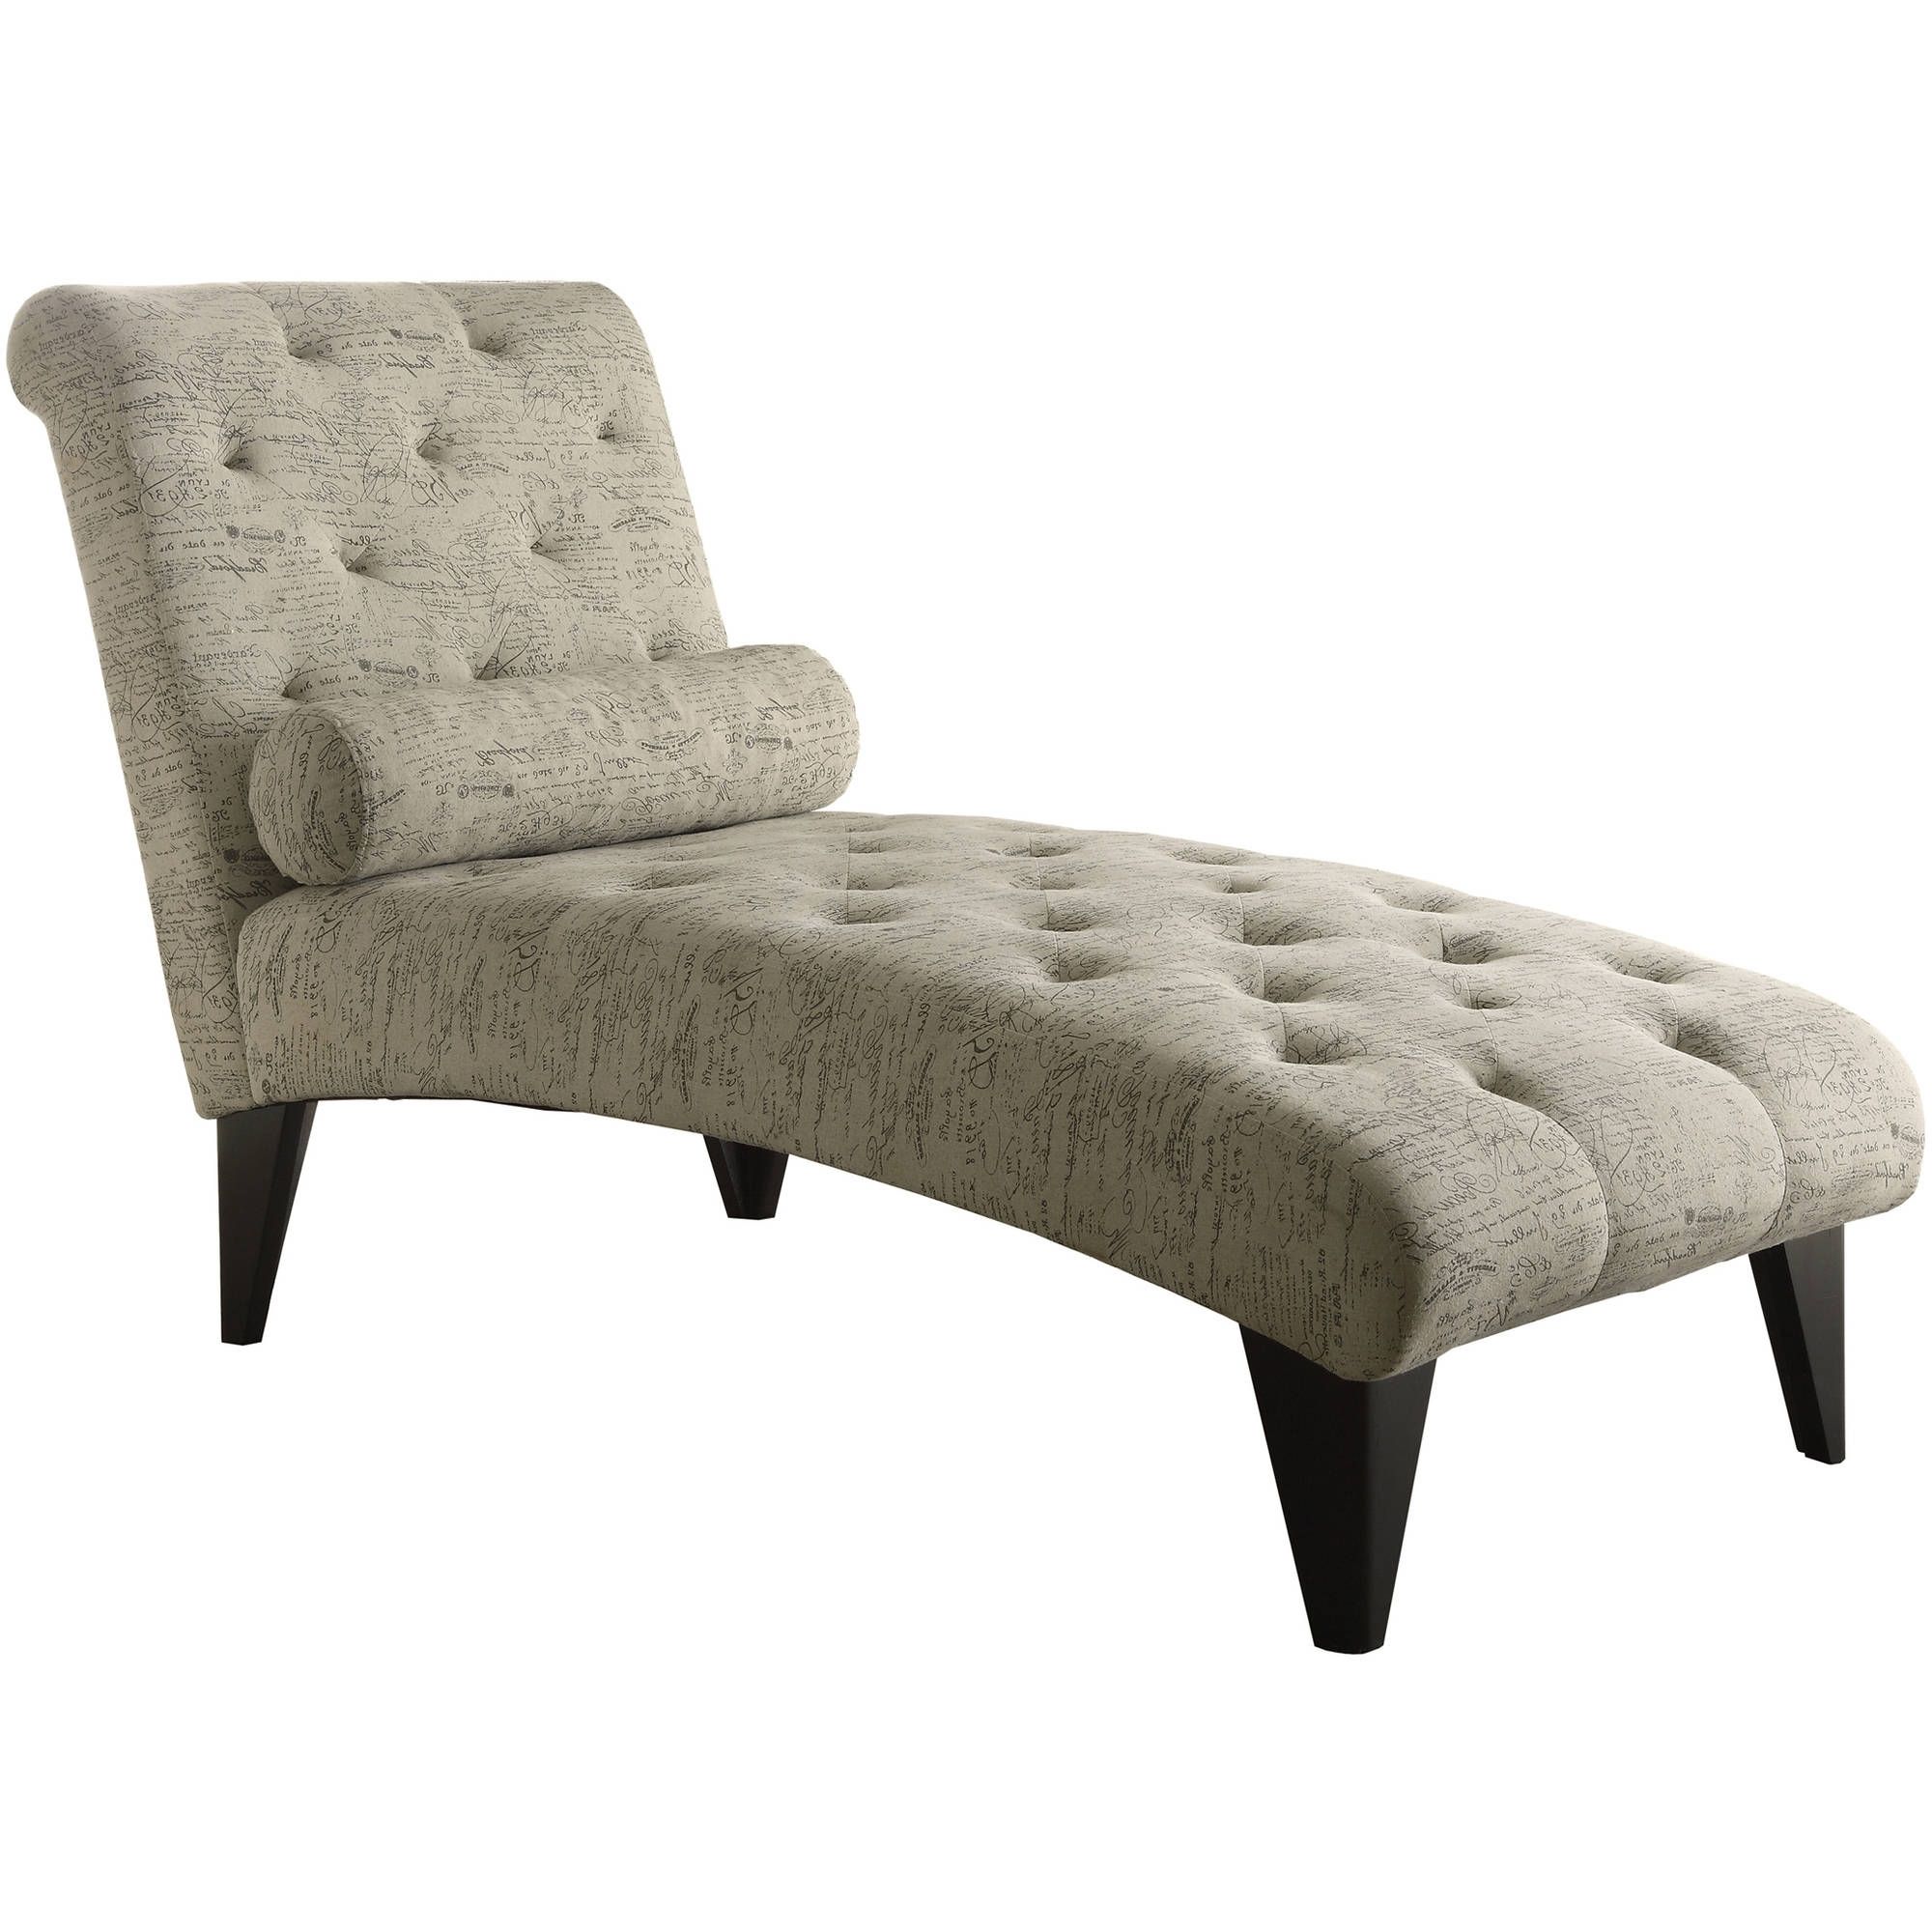 Preferred Chaise Lounges – Walmart Pertaining To Chaise Couch Lounges (View 11 of 15)